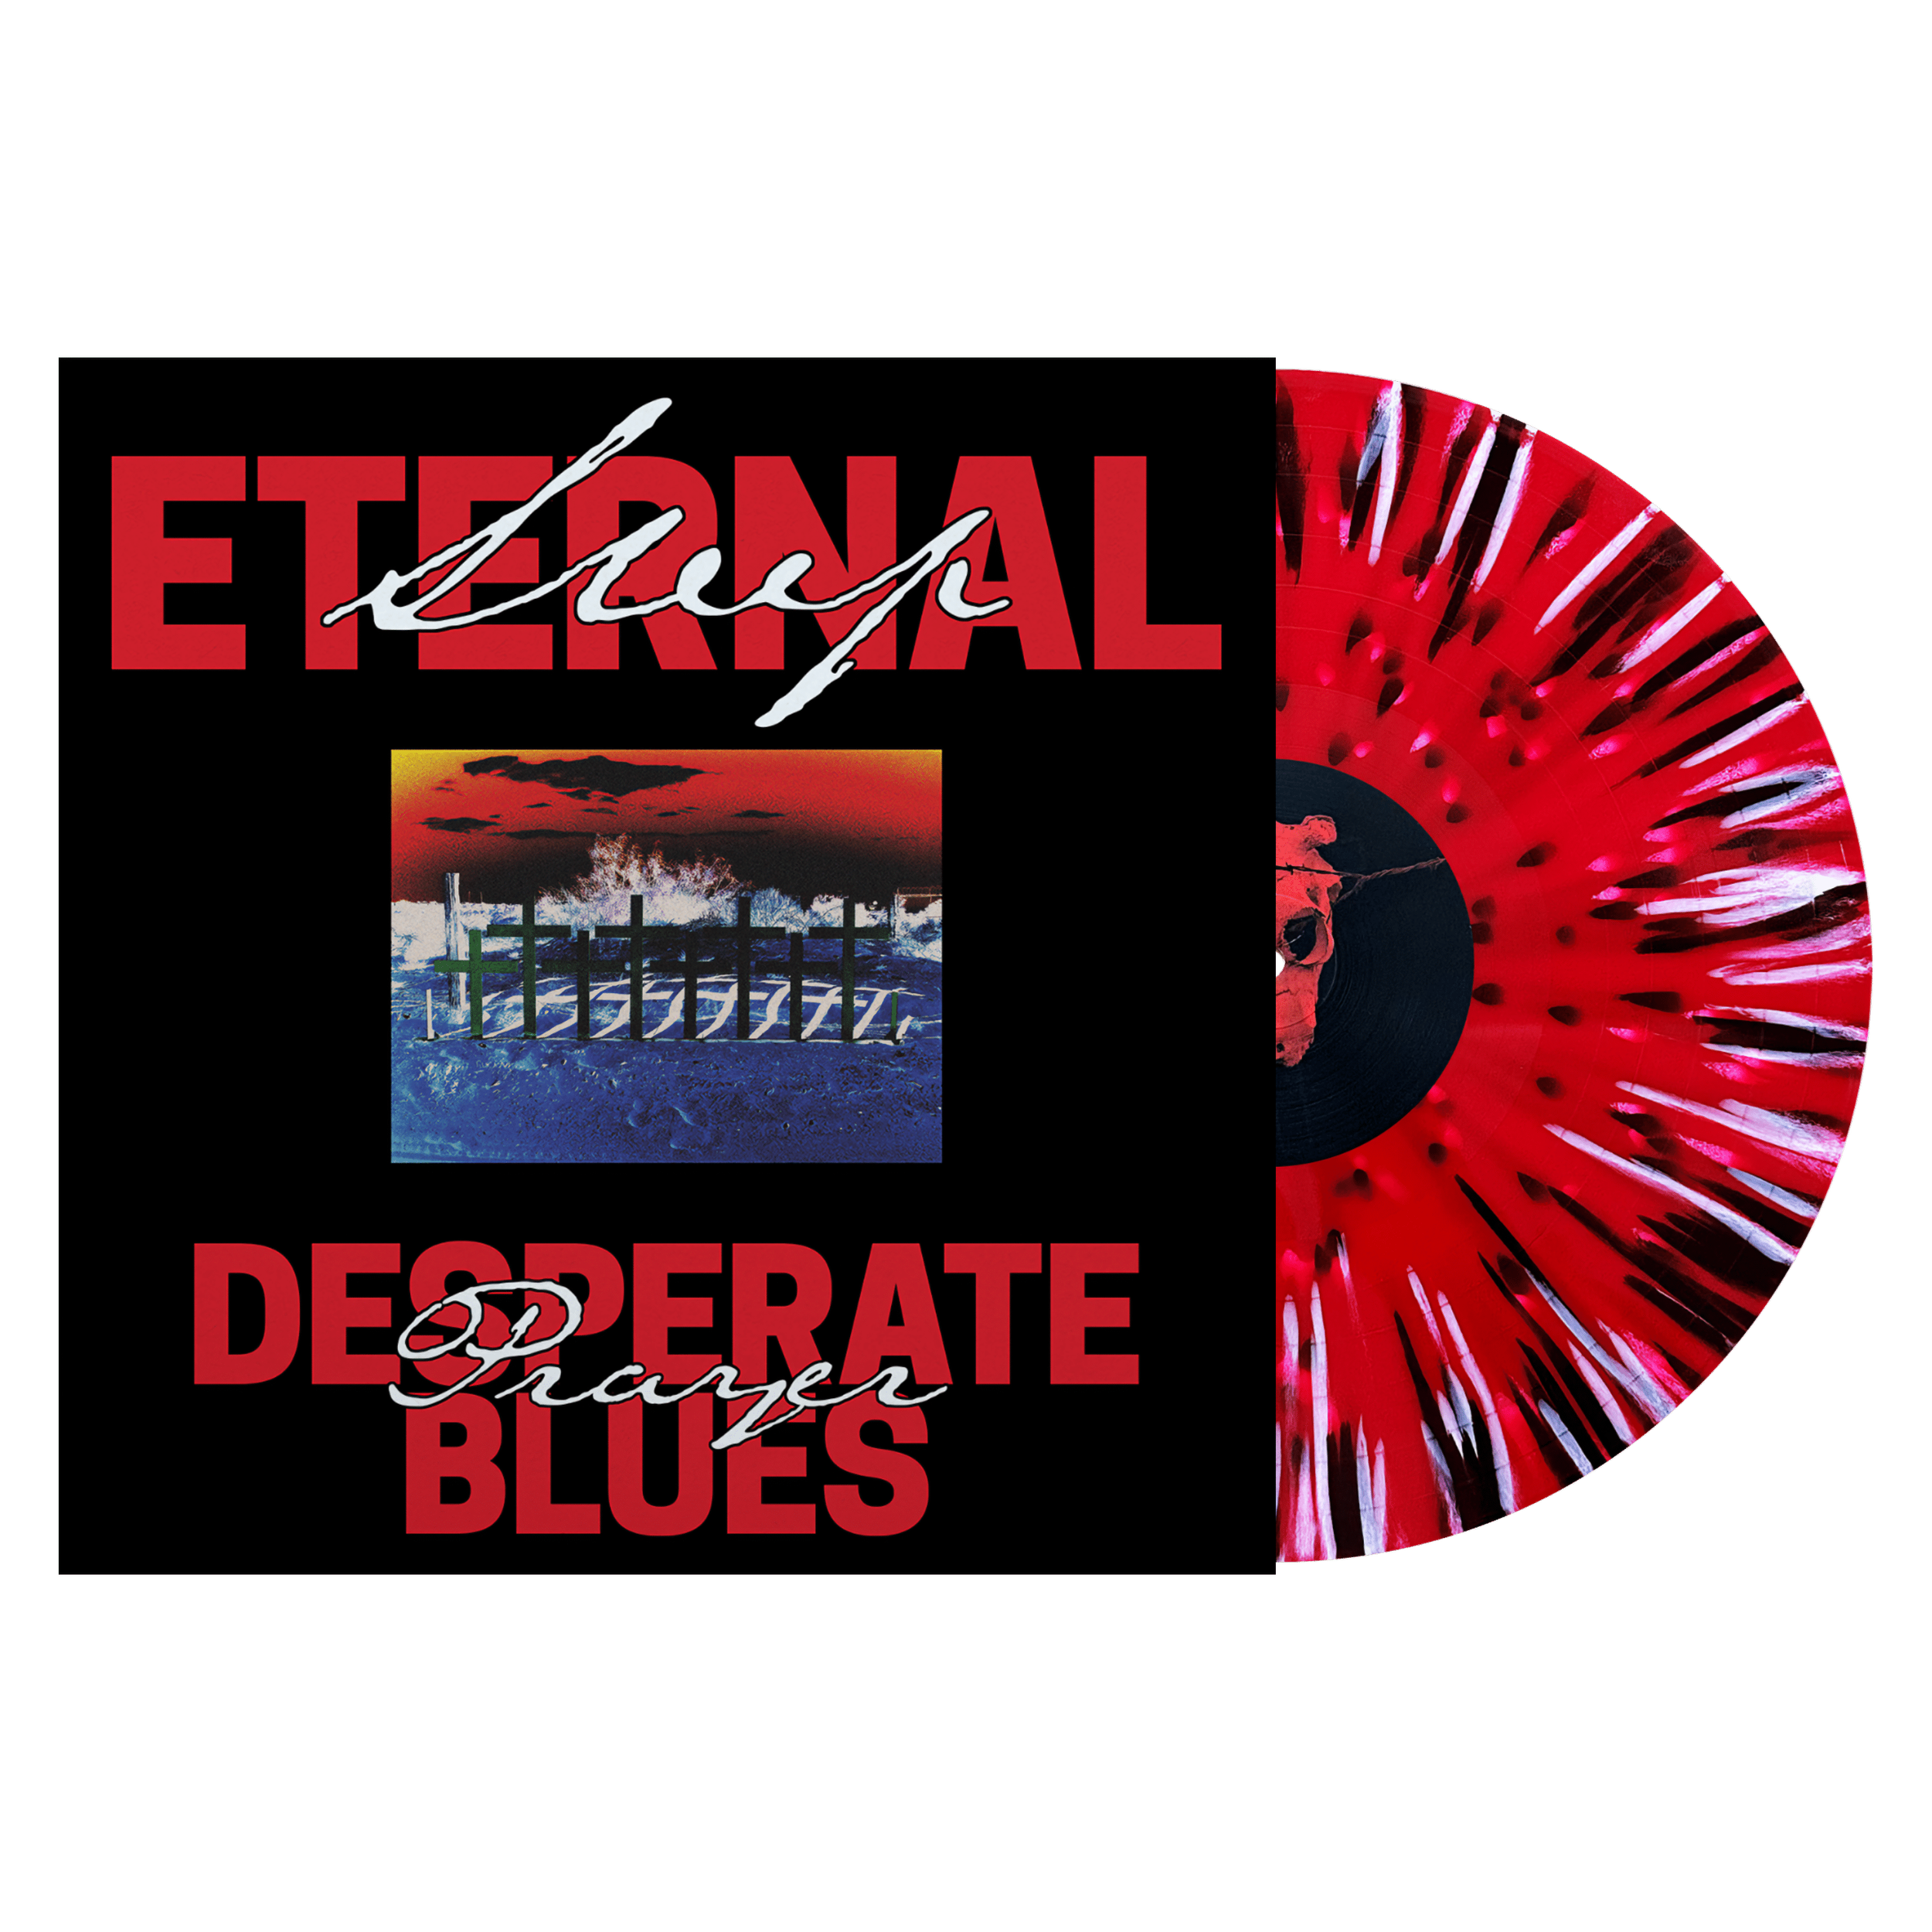 Eternal Sleep - Desperate Prayer Blues - Red with Black and White Splatter.png